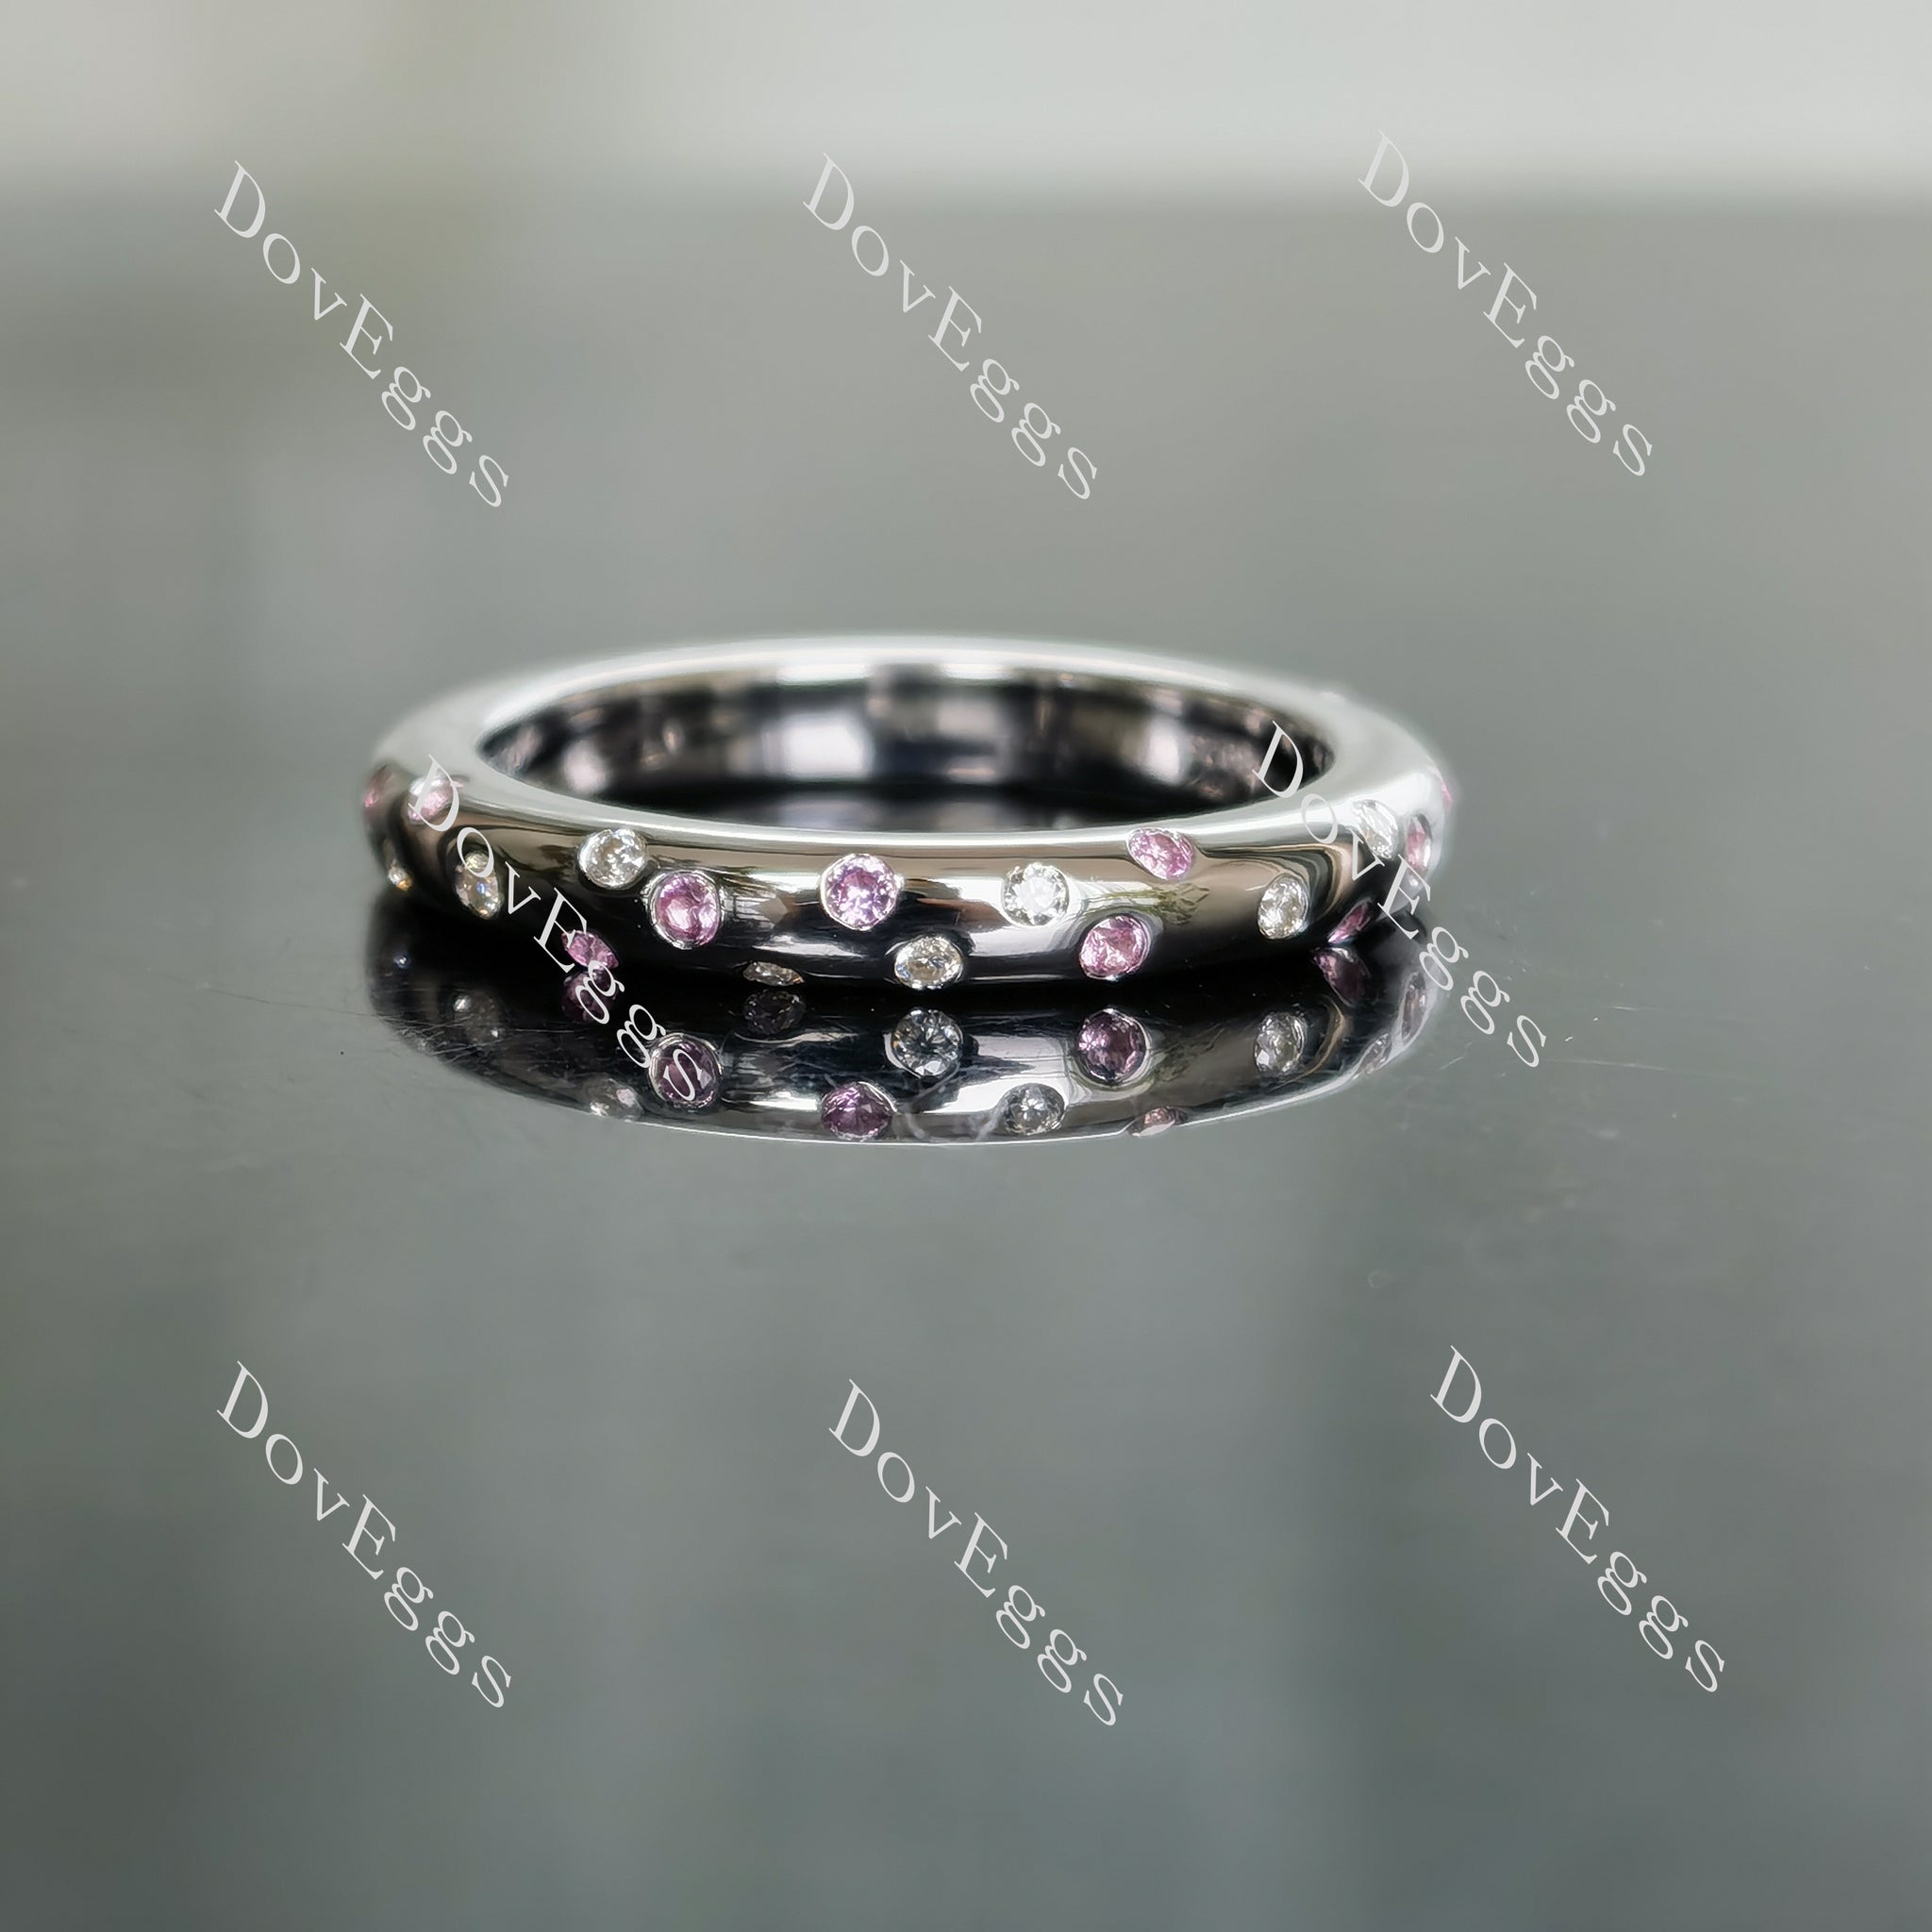 Doveggs round moissanite & colored gem wedding band-3.0mm band width